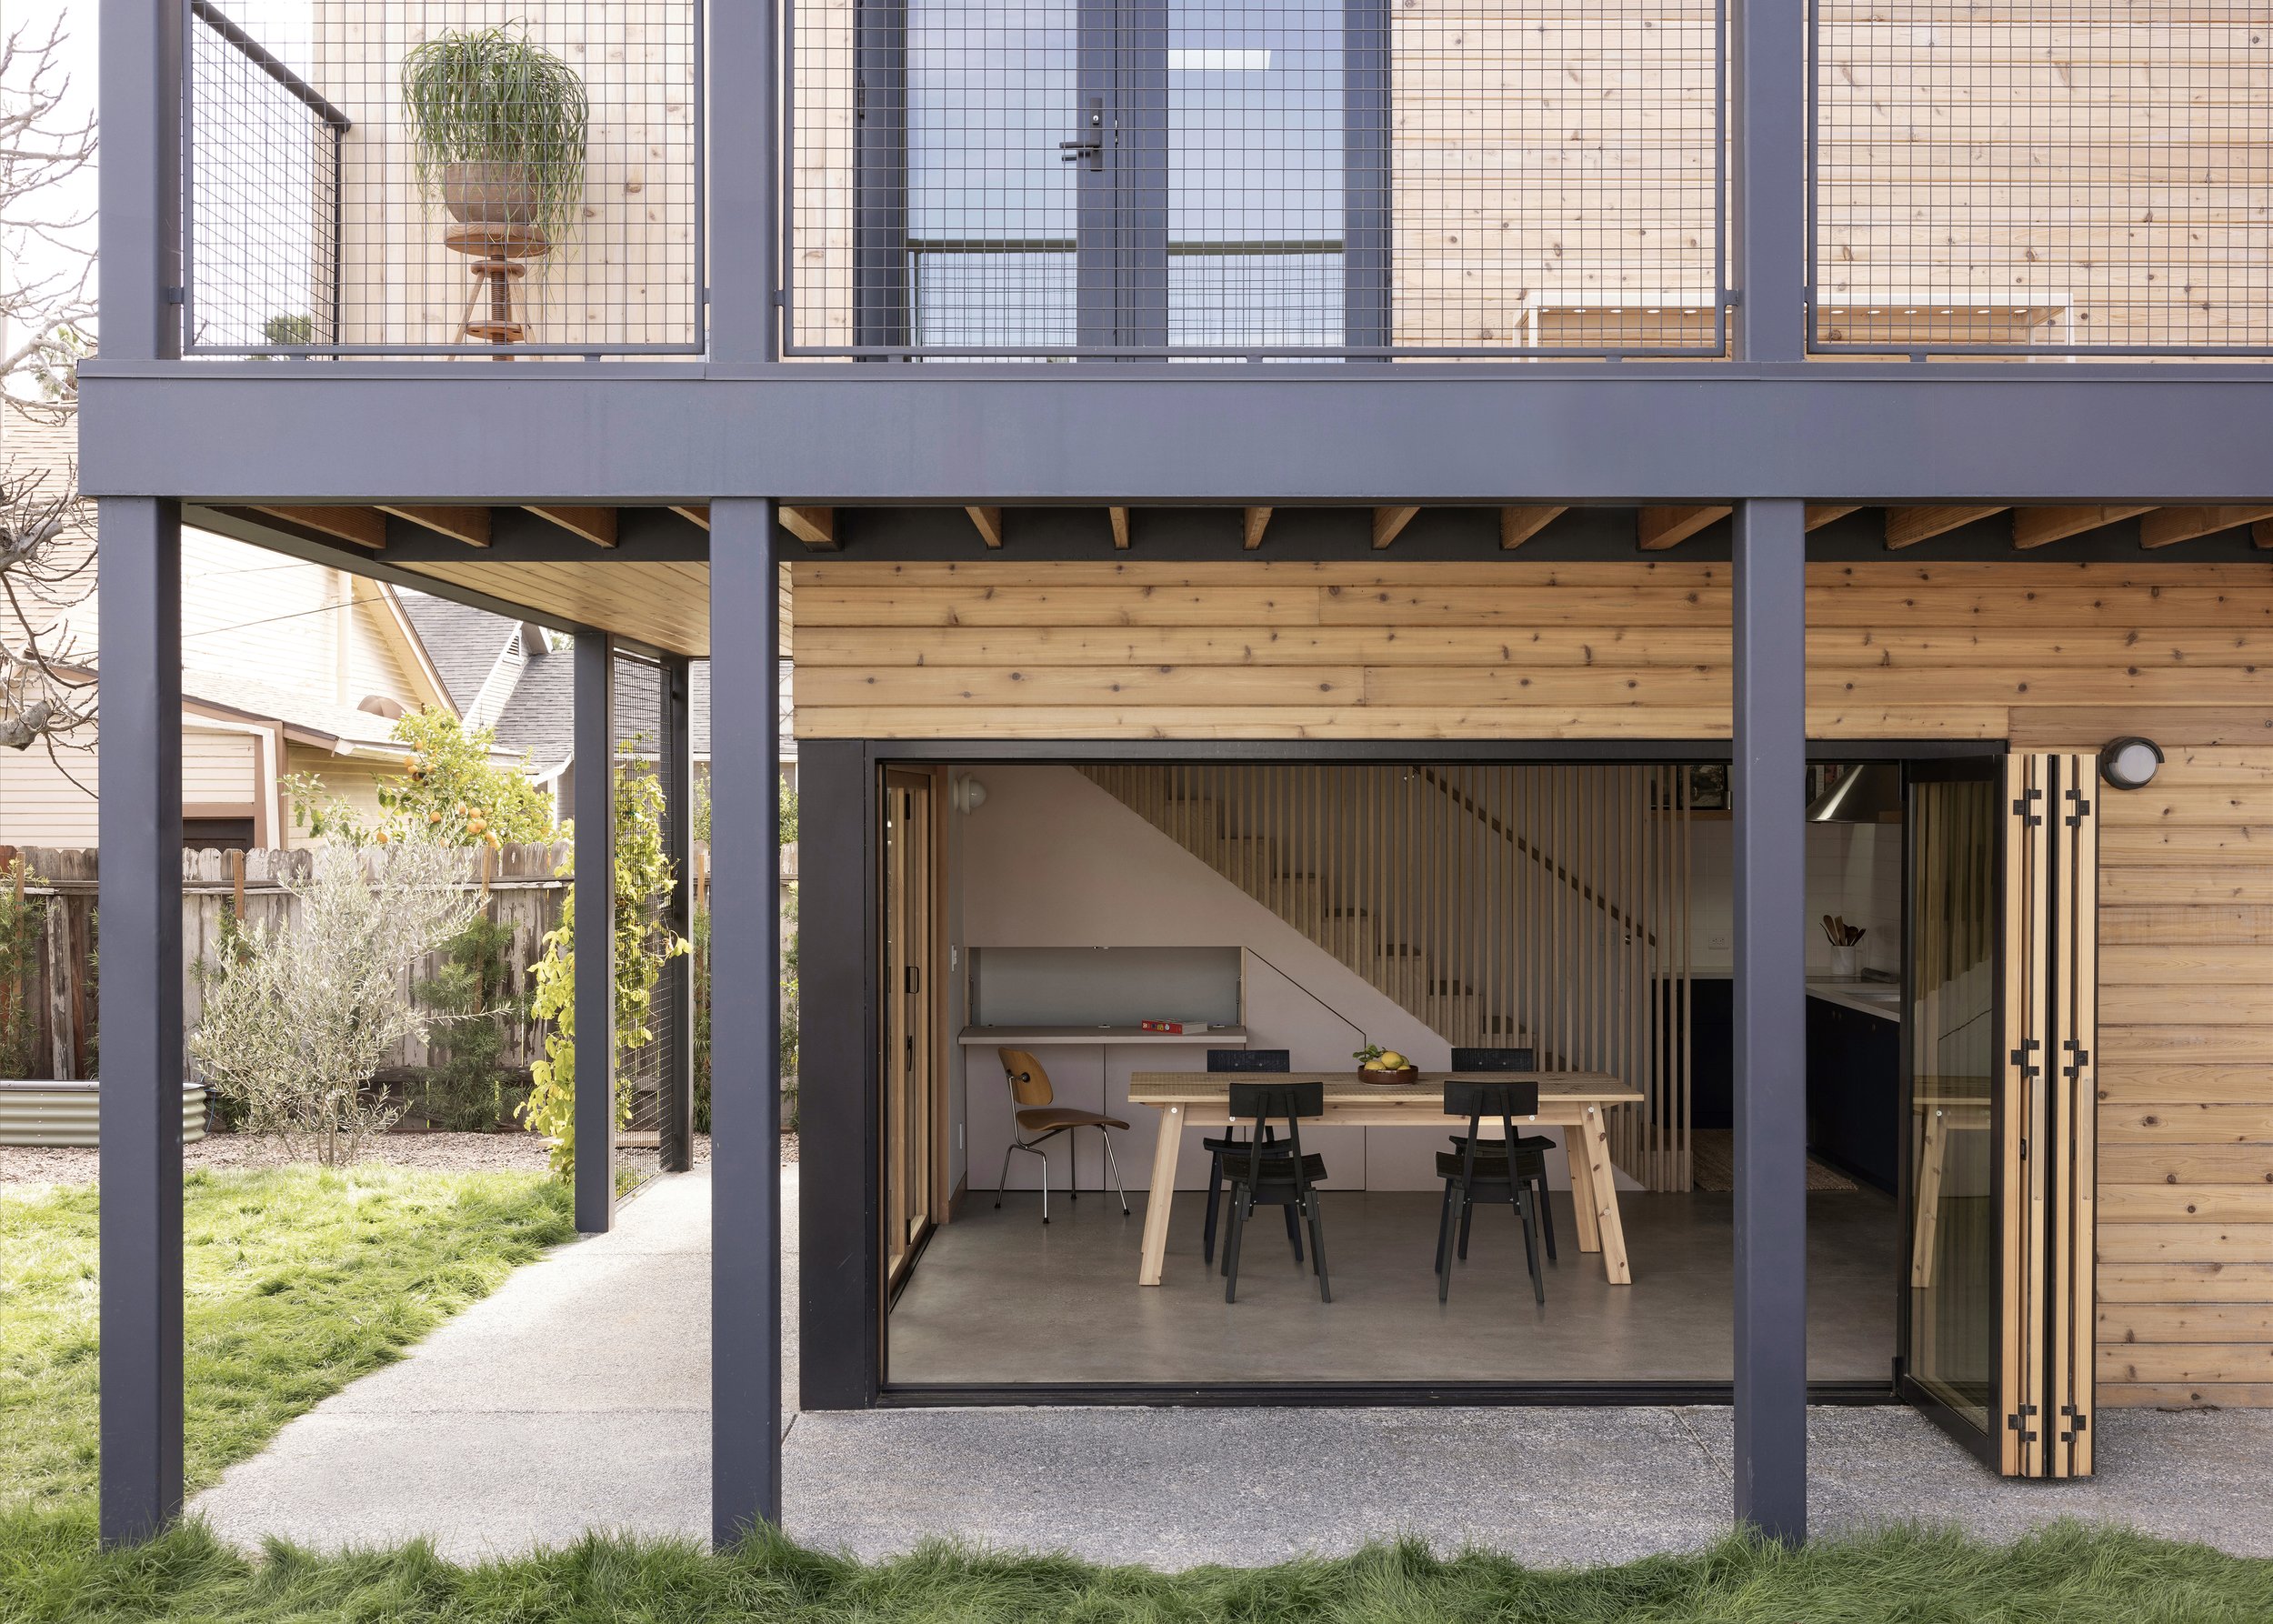 Accessory Dwelling Unit in Los Angeles, CA, designed by Social Studies Projects.